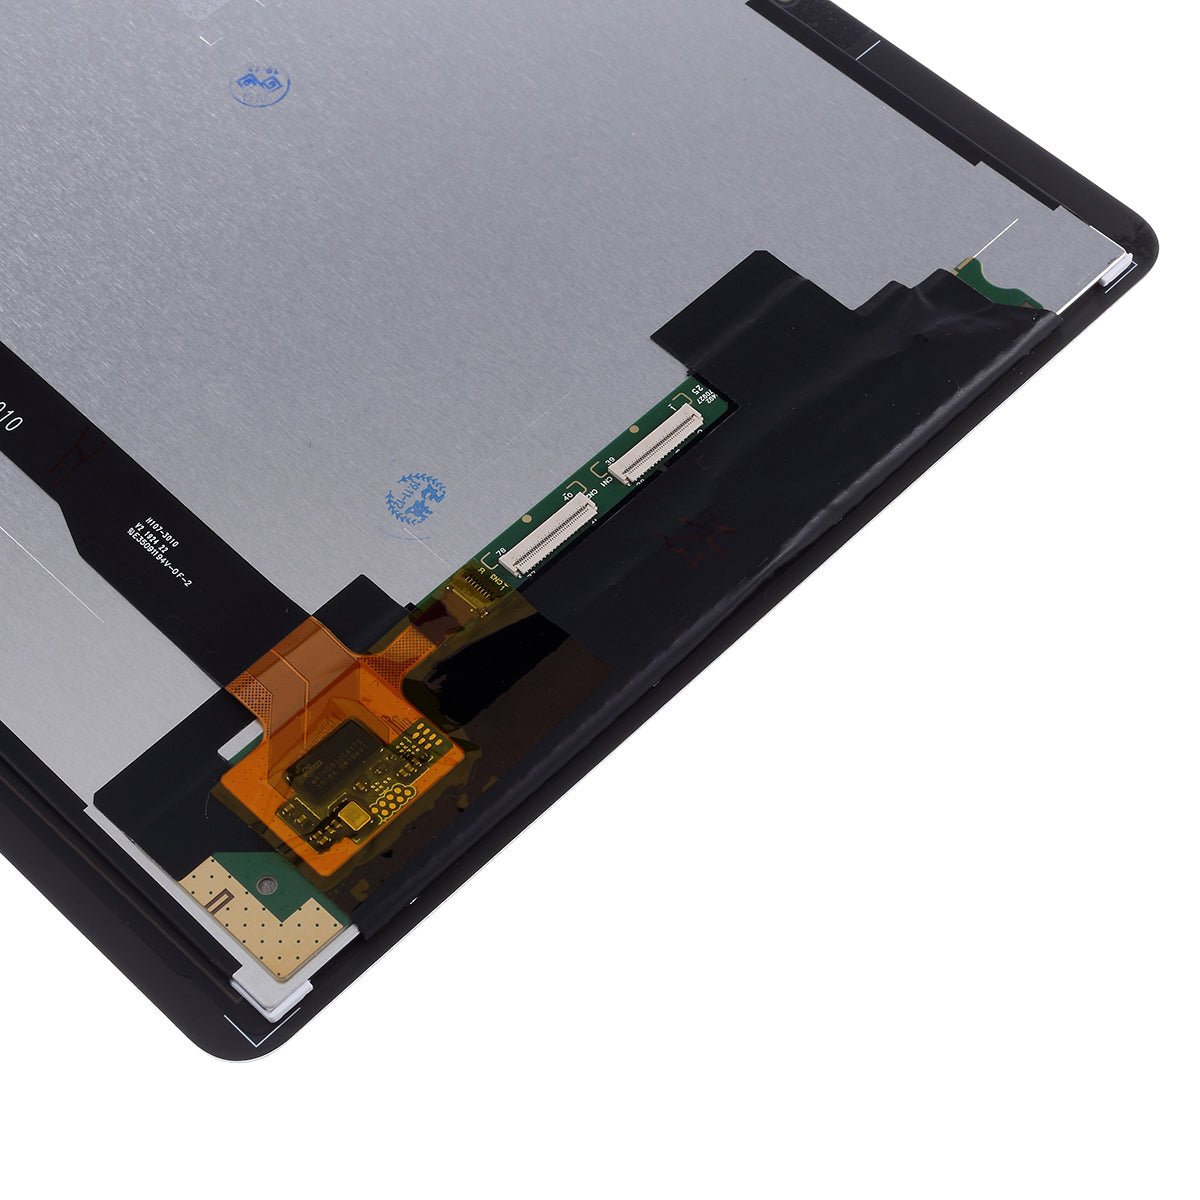 OEM LCD Screen and Digitizer Assembly Replace Part for Huawei MediaPad M6 10.8-inch